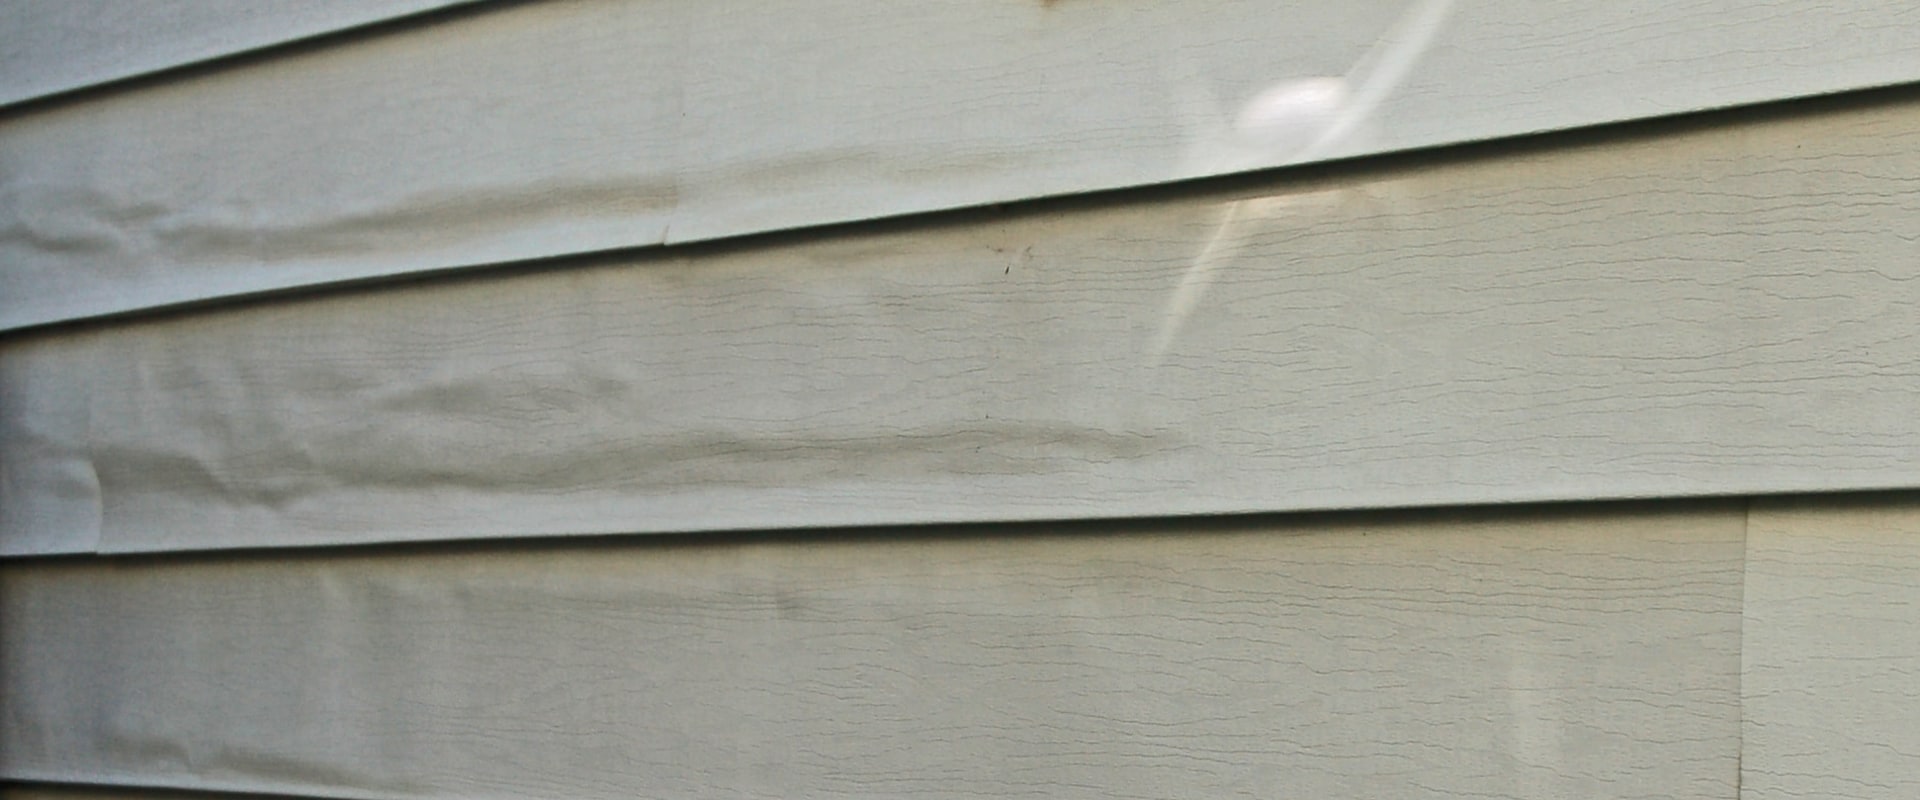 How often does vinyl siding need to be painted?